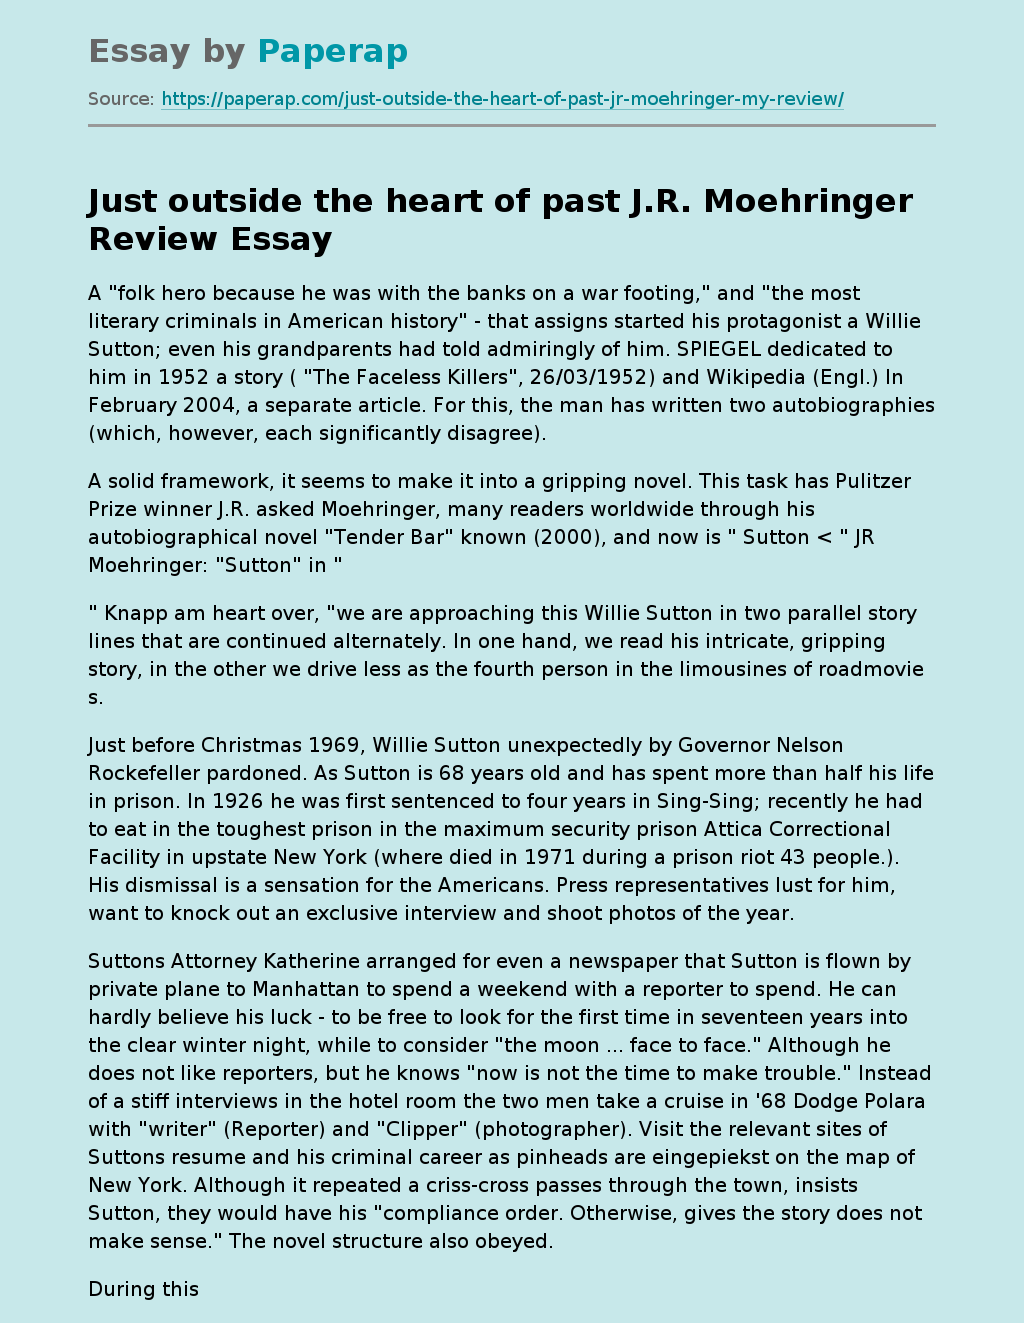 Just outside the heart of past J.R. Moehringer Review